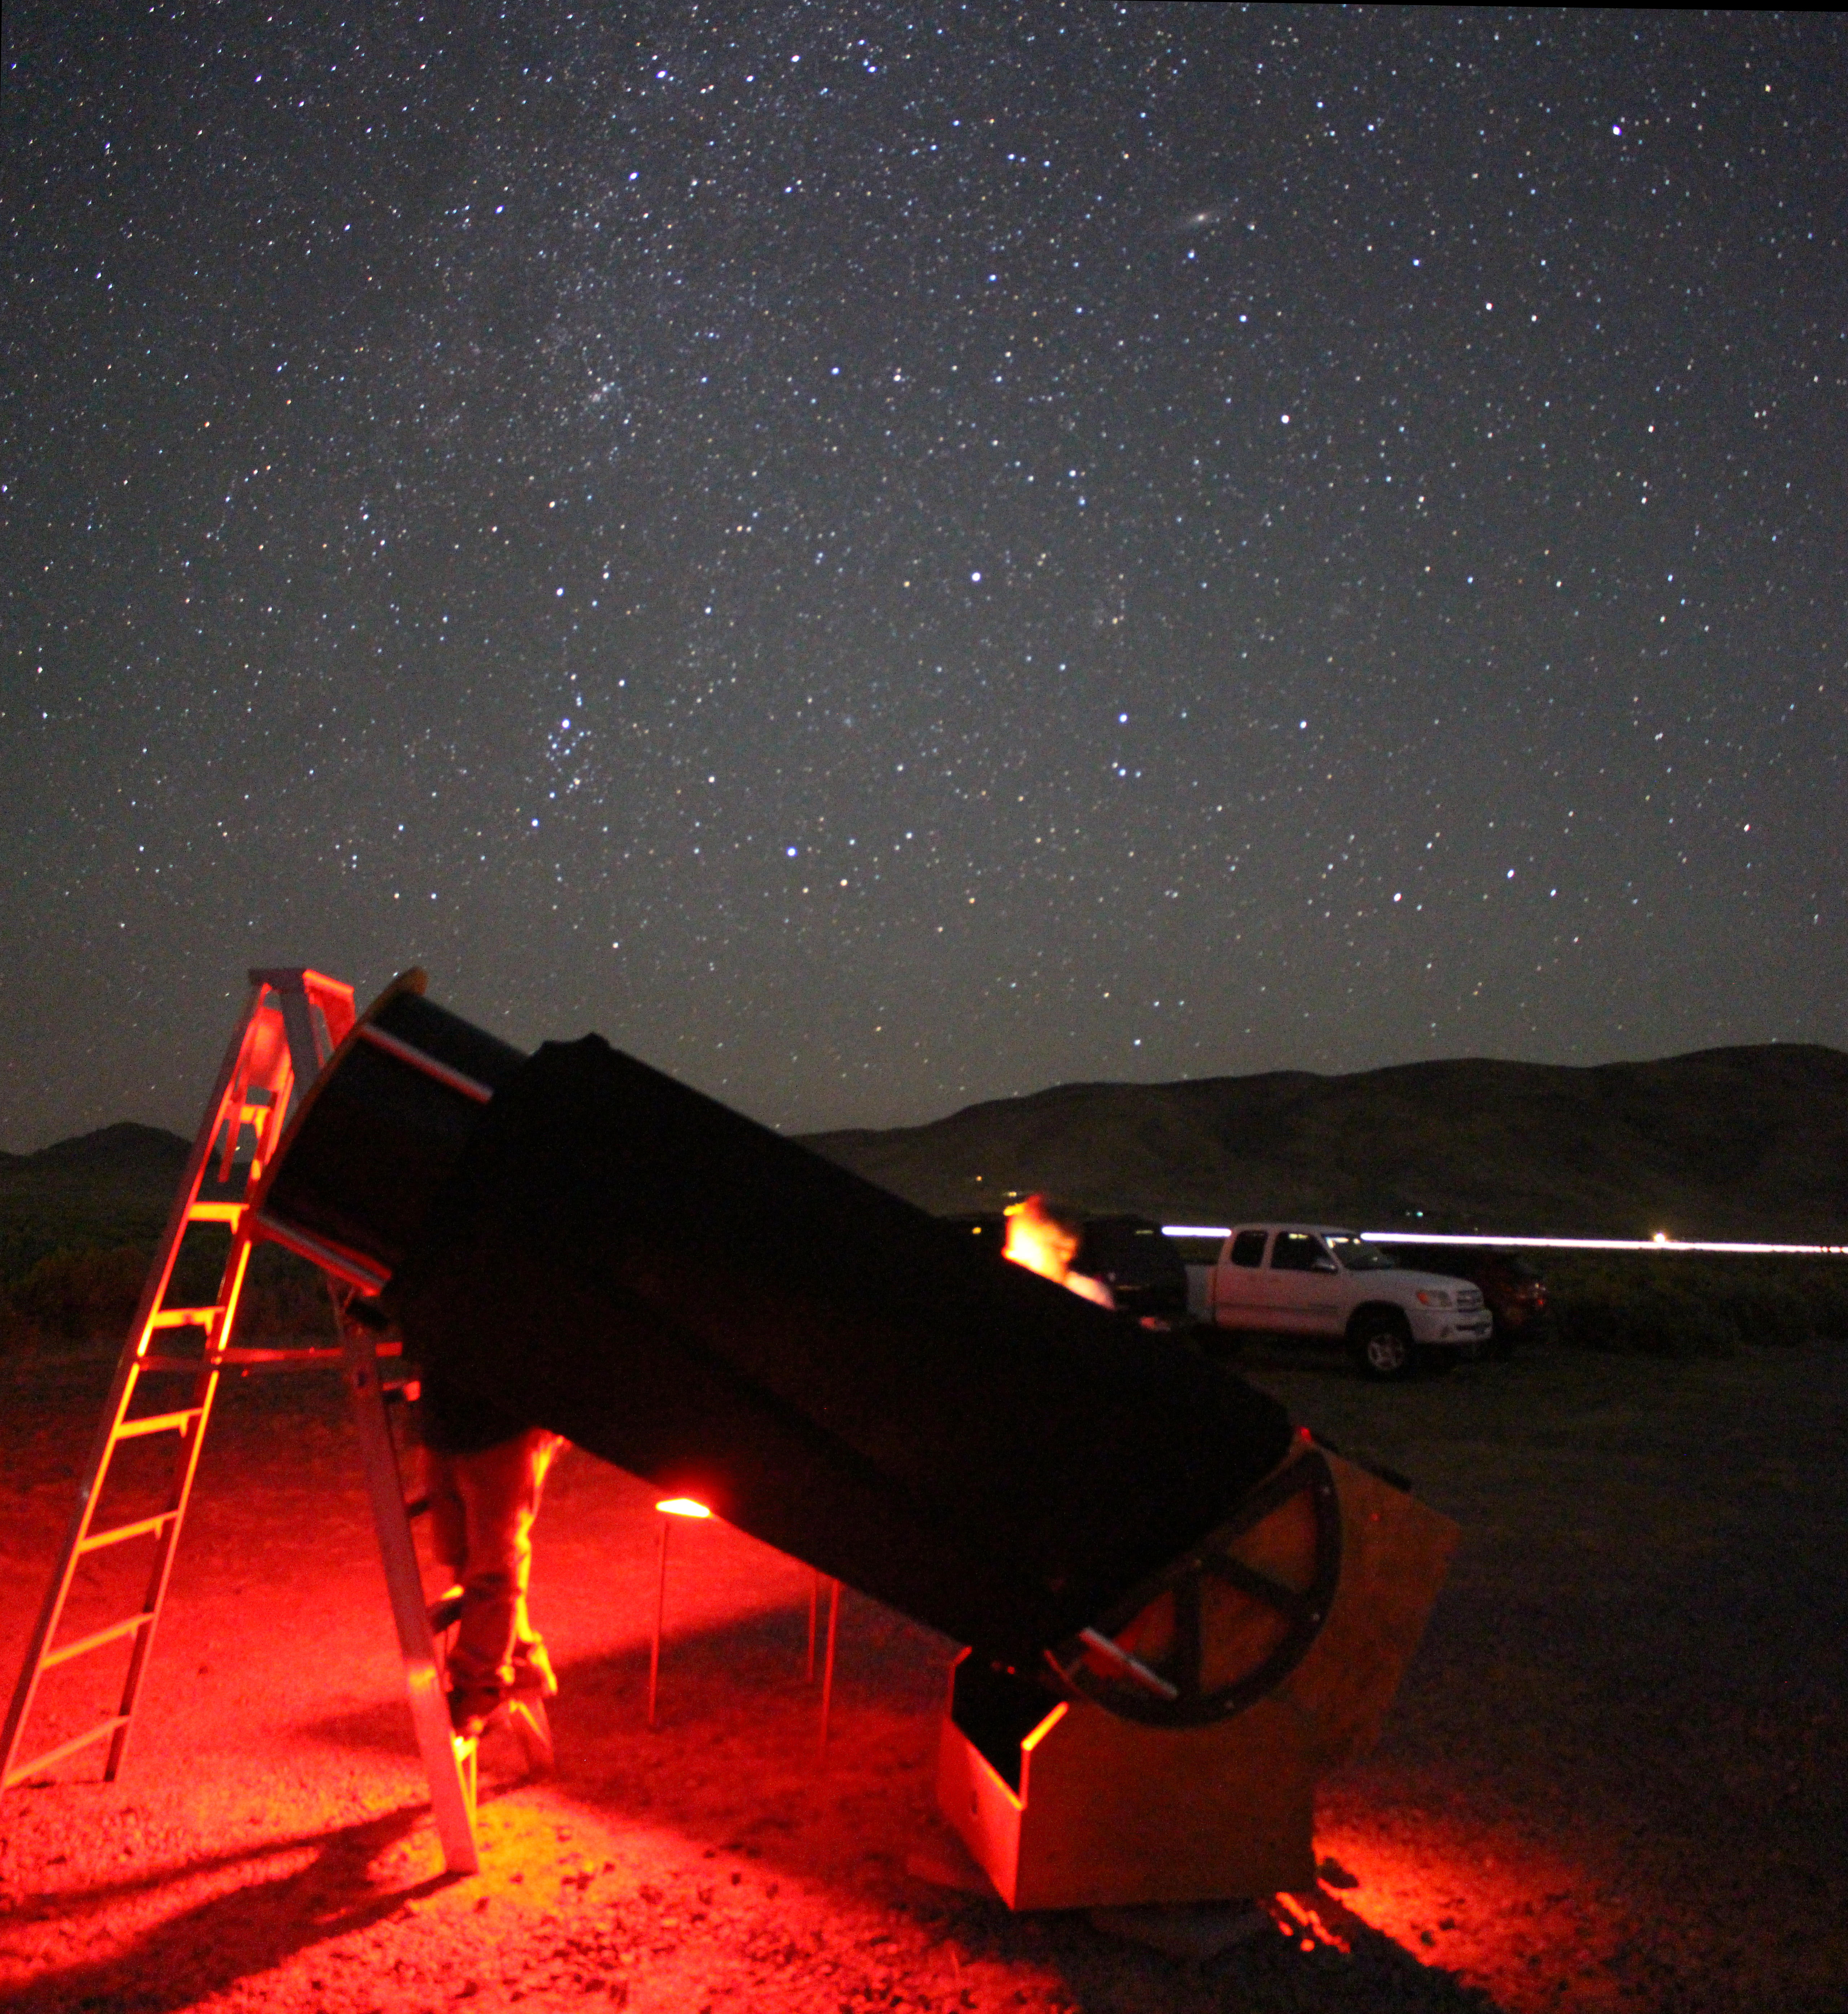 Images from ASN Star Party 